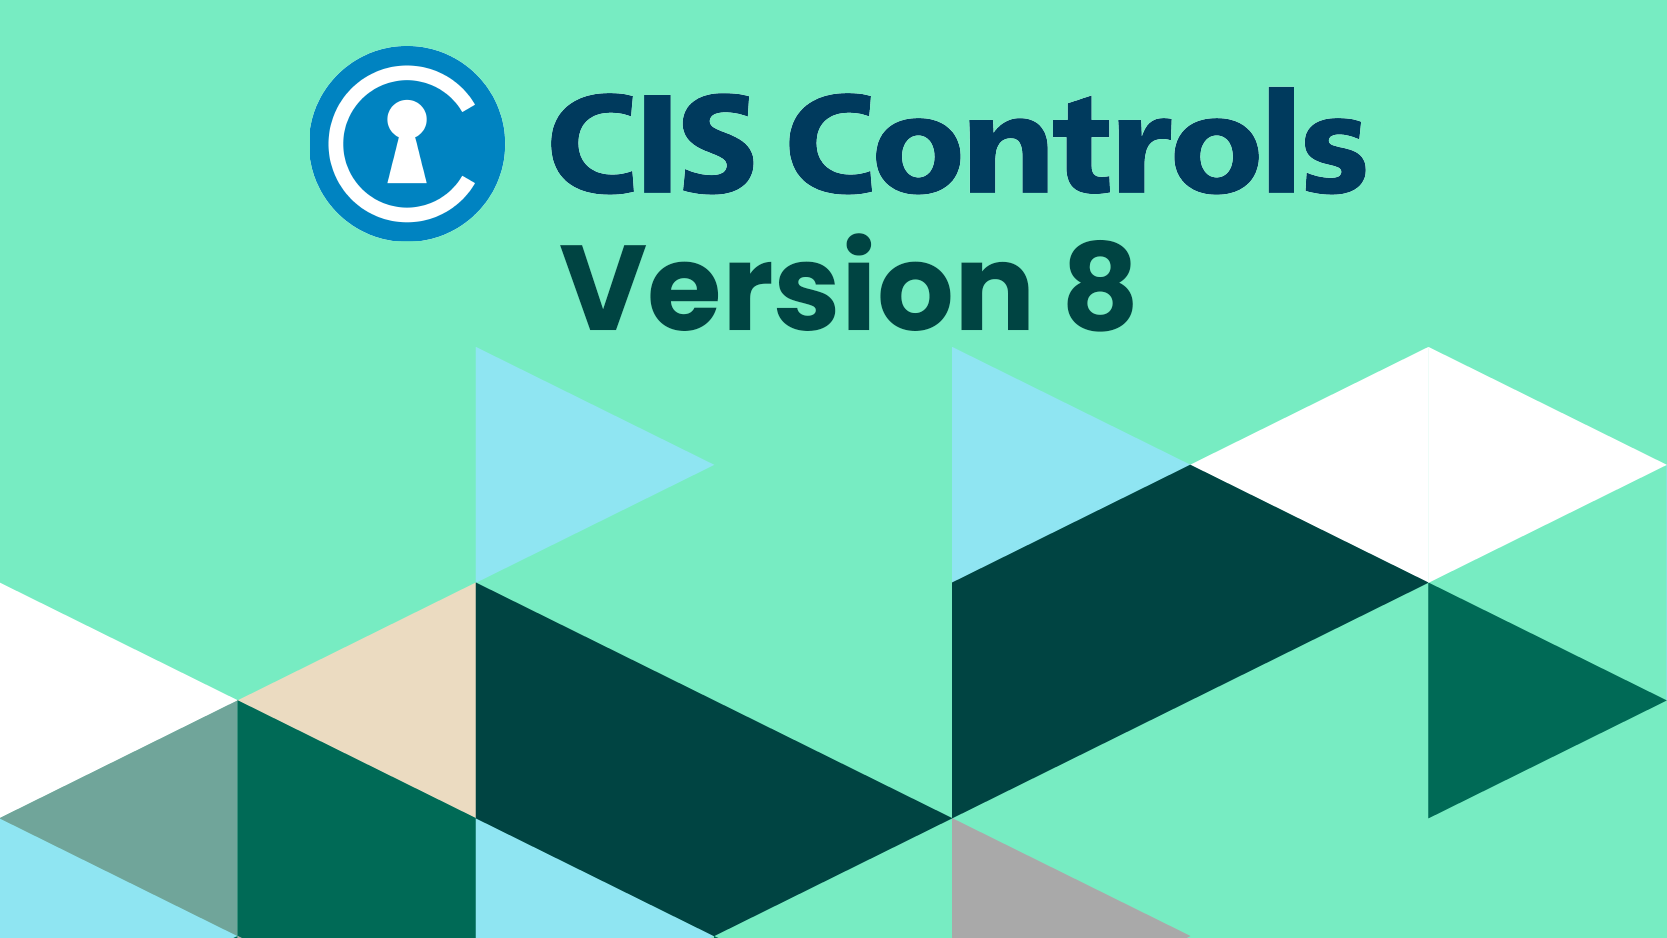 CIS Control 01 Inventory And Control Of Enterprise Assets Tripwire